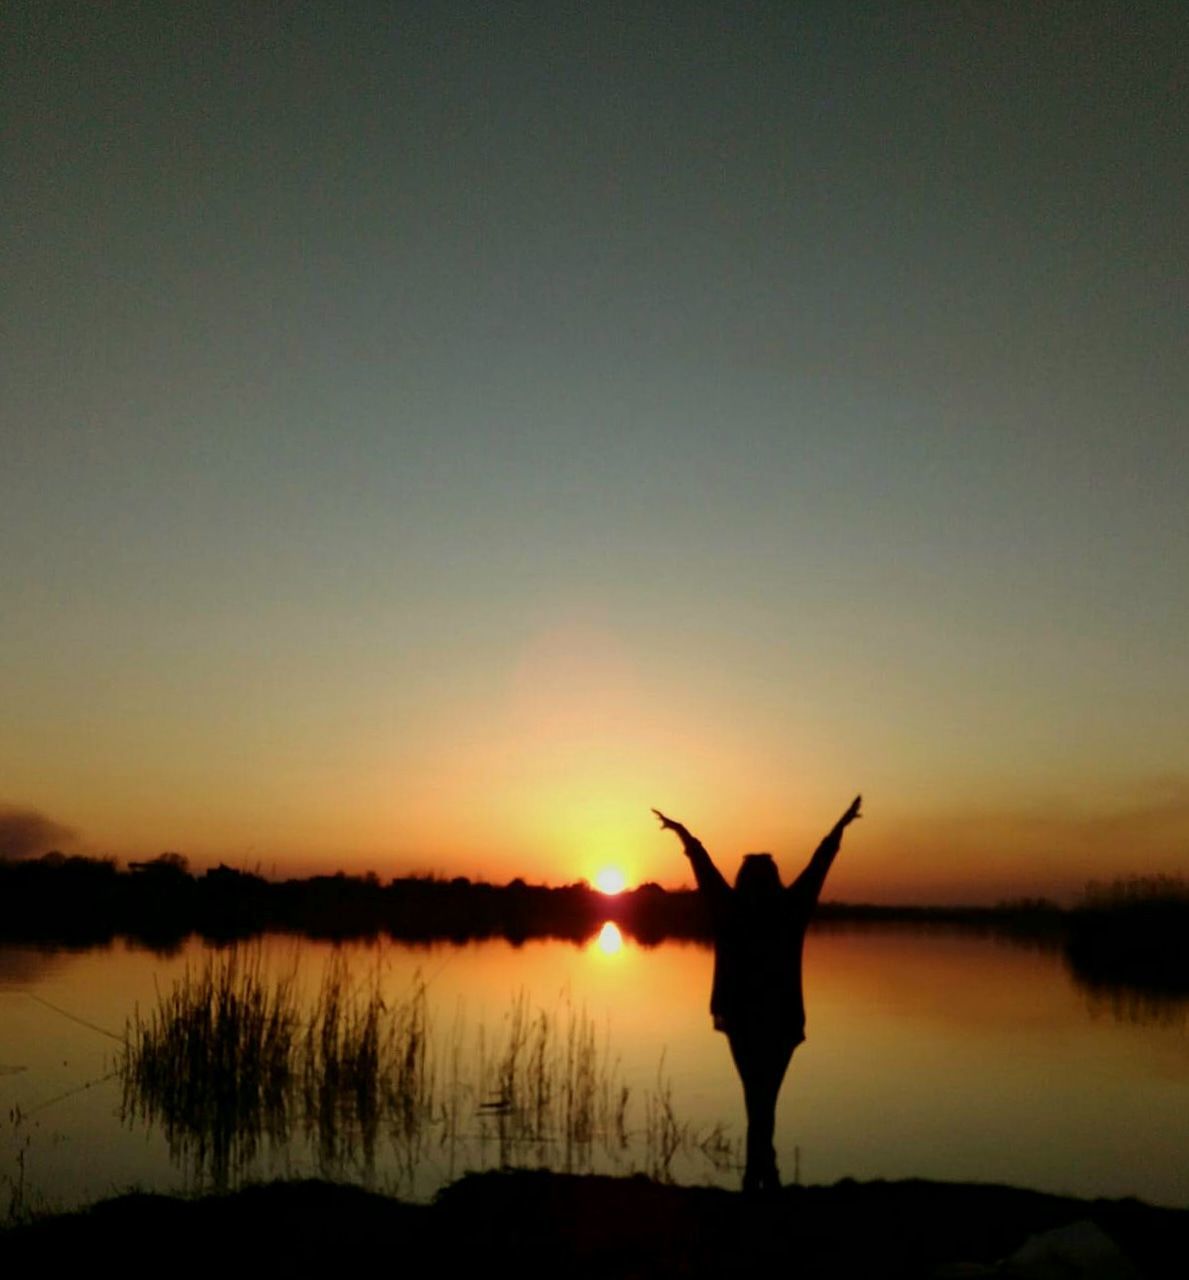 sunset, silhouette, sky, human arm, beauty in nature, standing, tranquility, one person, scenics - nature, orange color, tranquil scene, real people, leisure activity, arms raised, nature, limb, lifestyles, non-urban scene, water, copy space